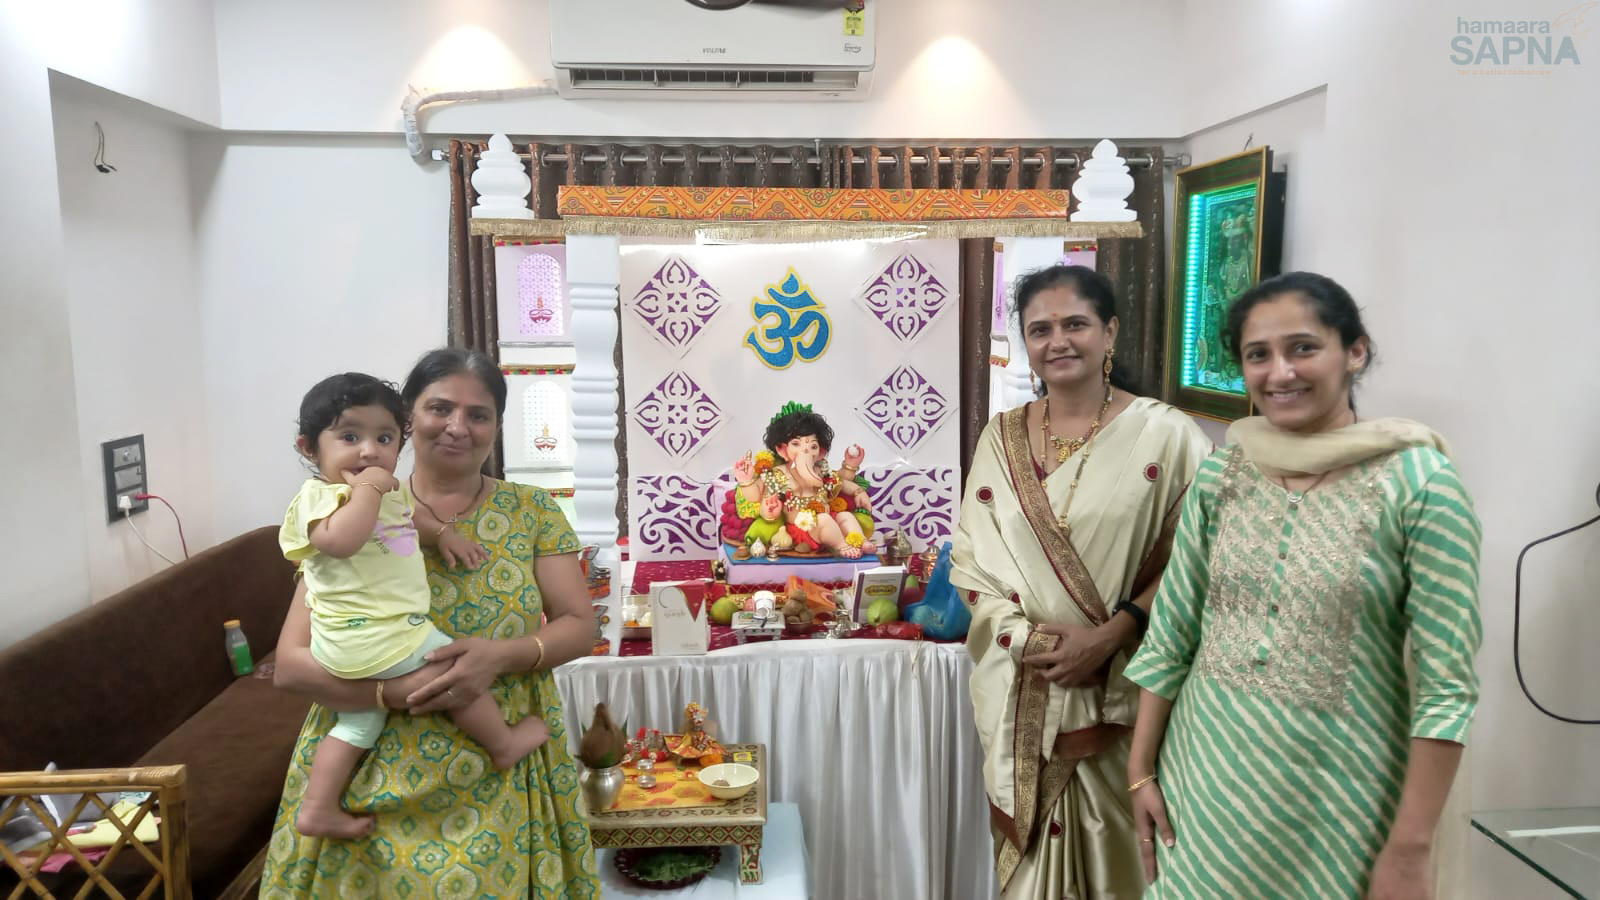 During the Ganesh Festival, beneficiaries' home was decorated beautifully with a magnificent mandap